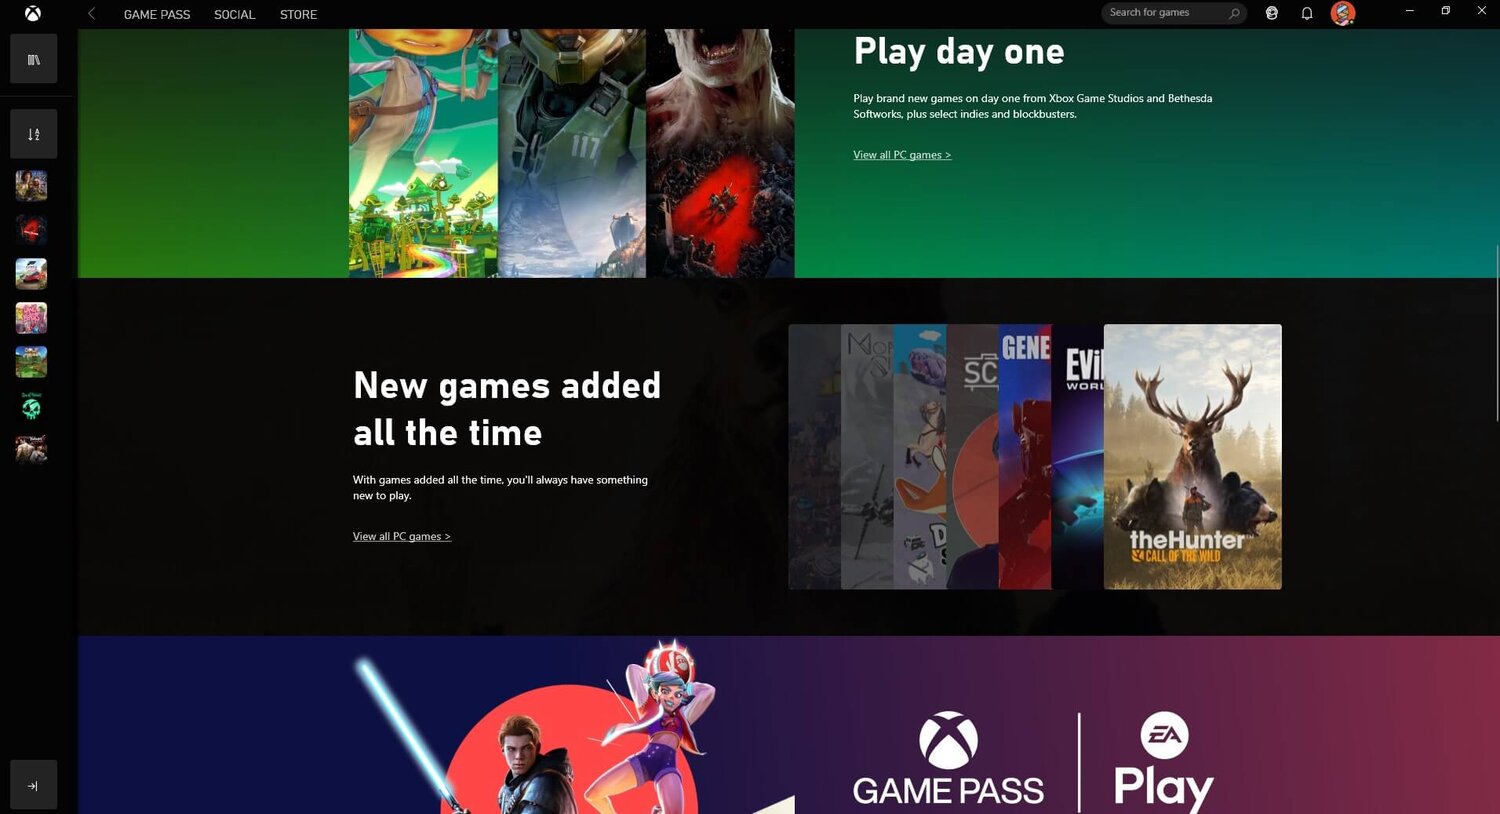 Xbox Game Pass, Software